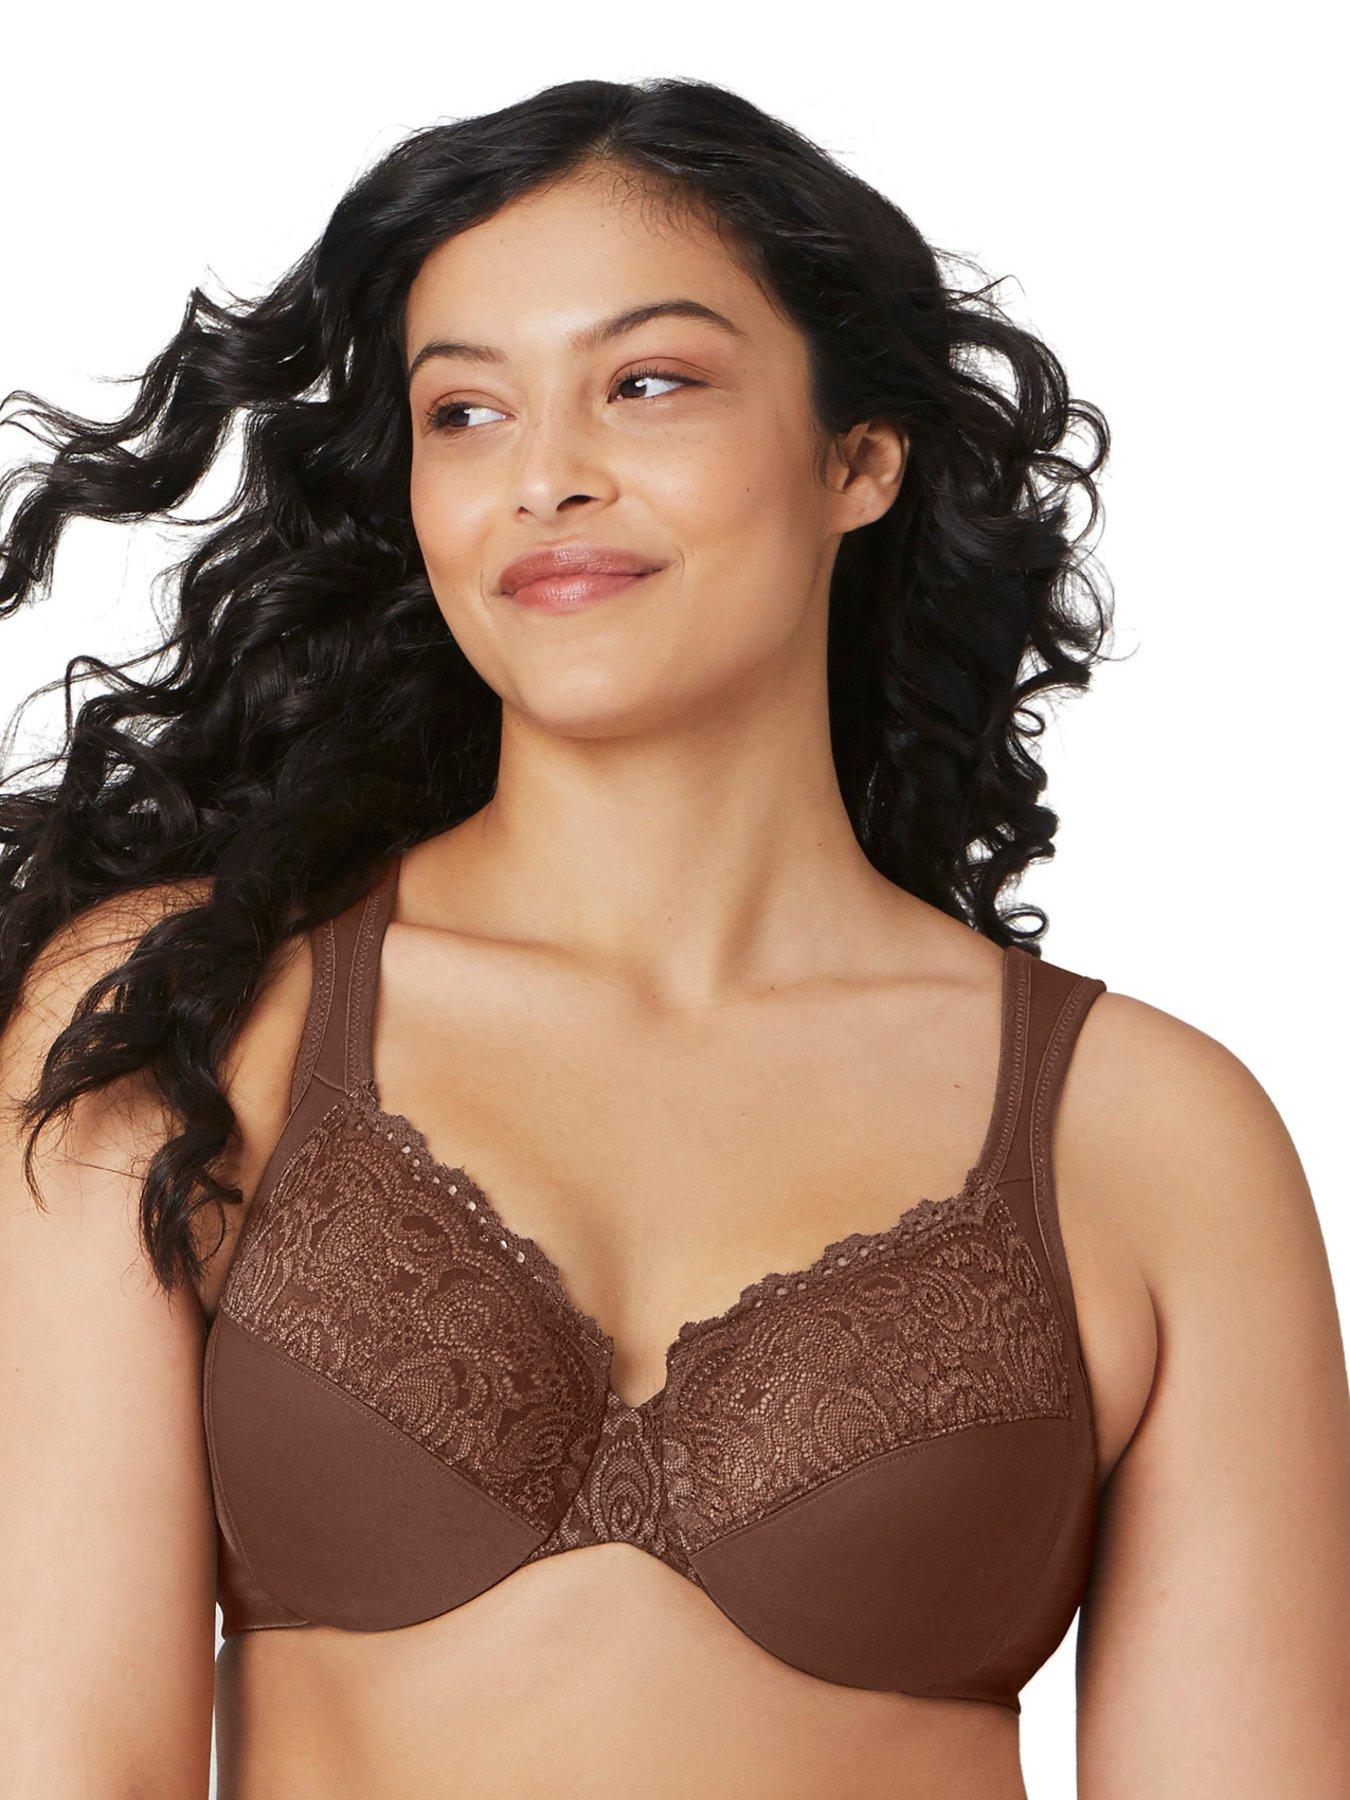 Shop for Size 44, Brown, Lingerie